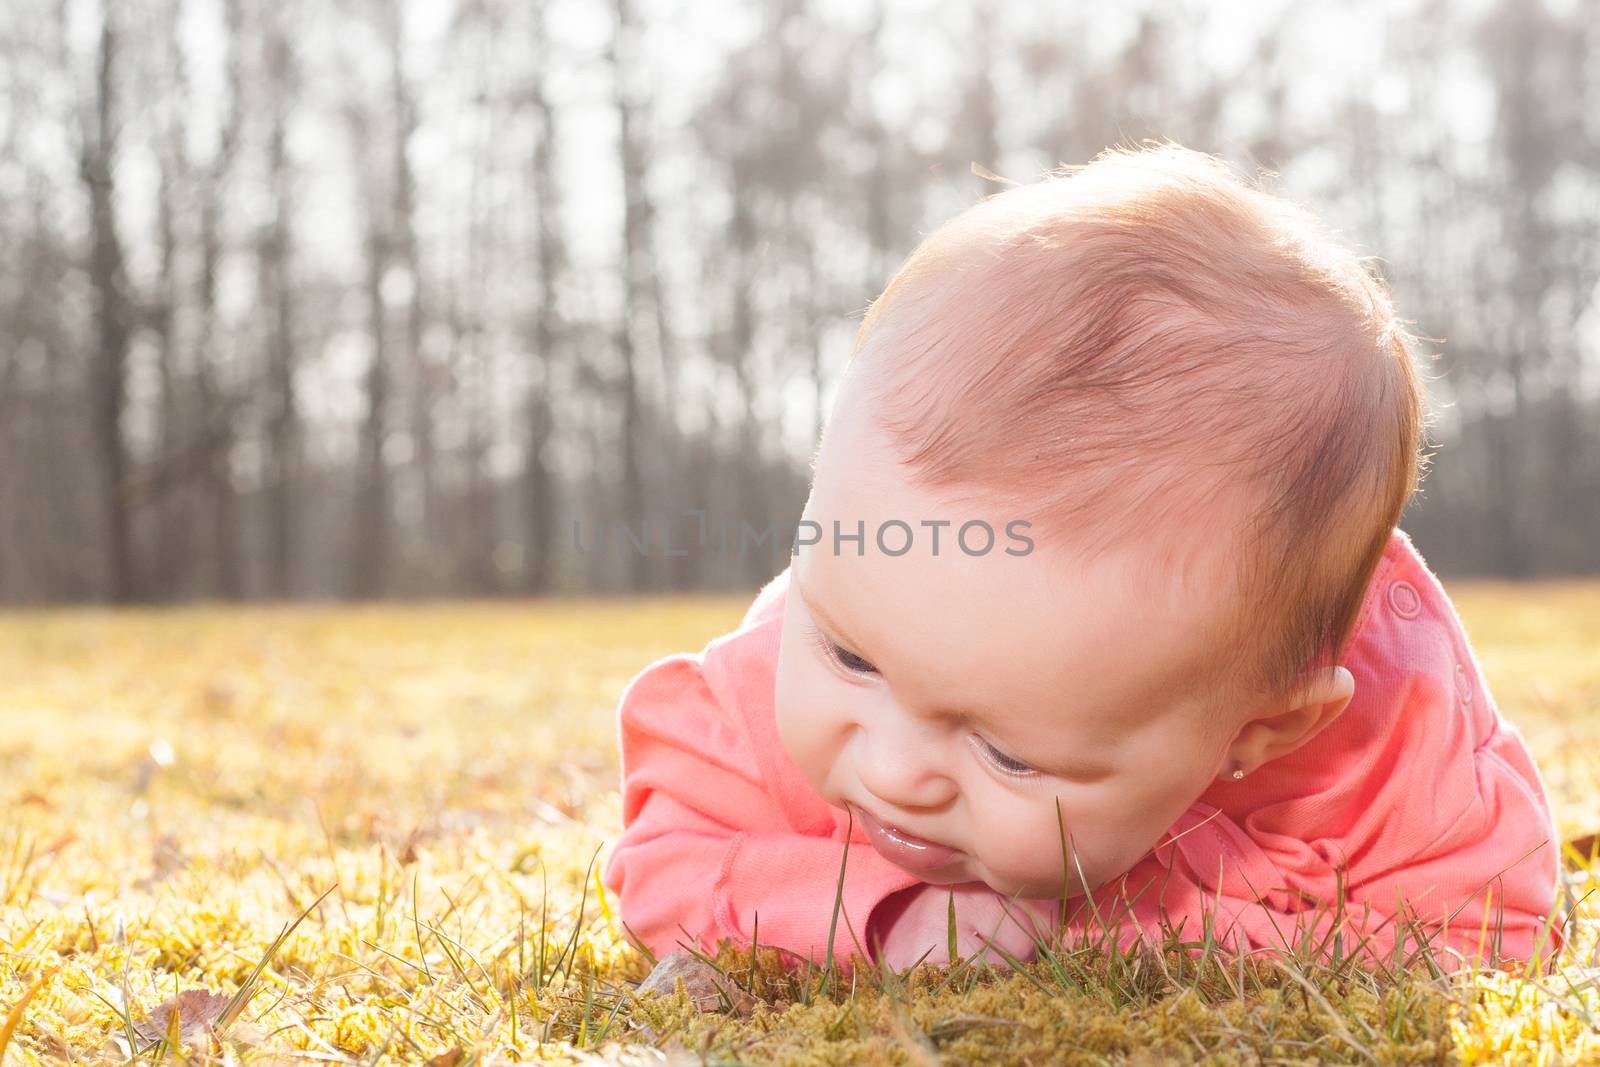 baby searching for blades of grass by DNFStyle